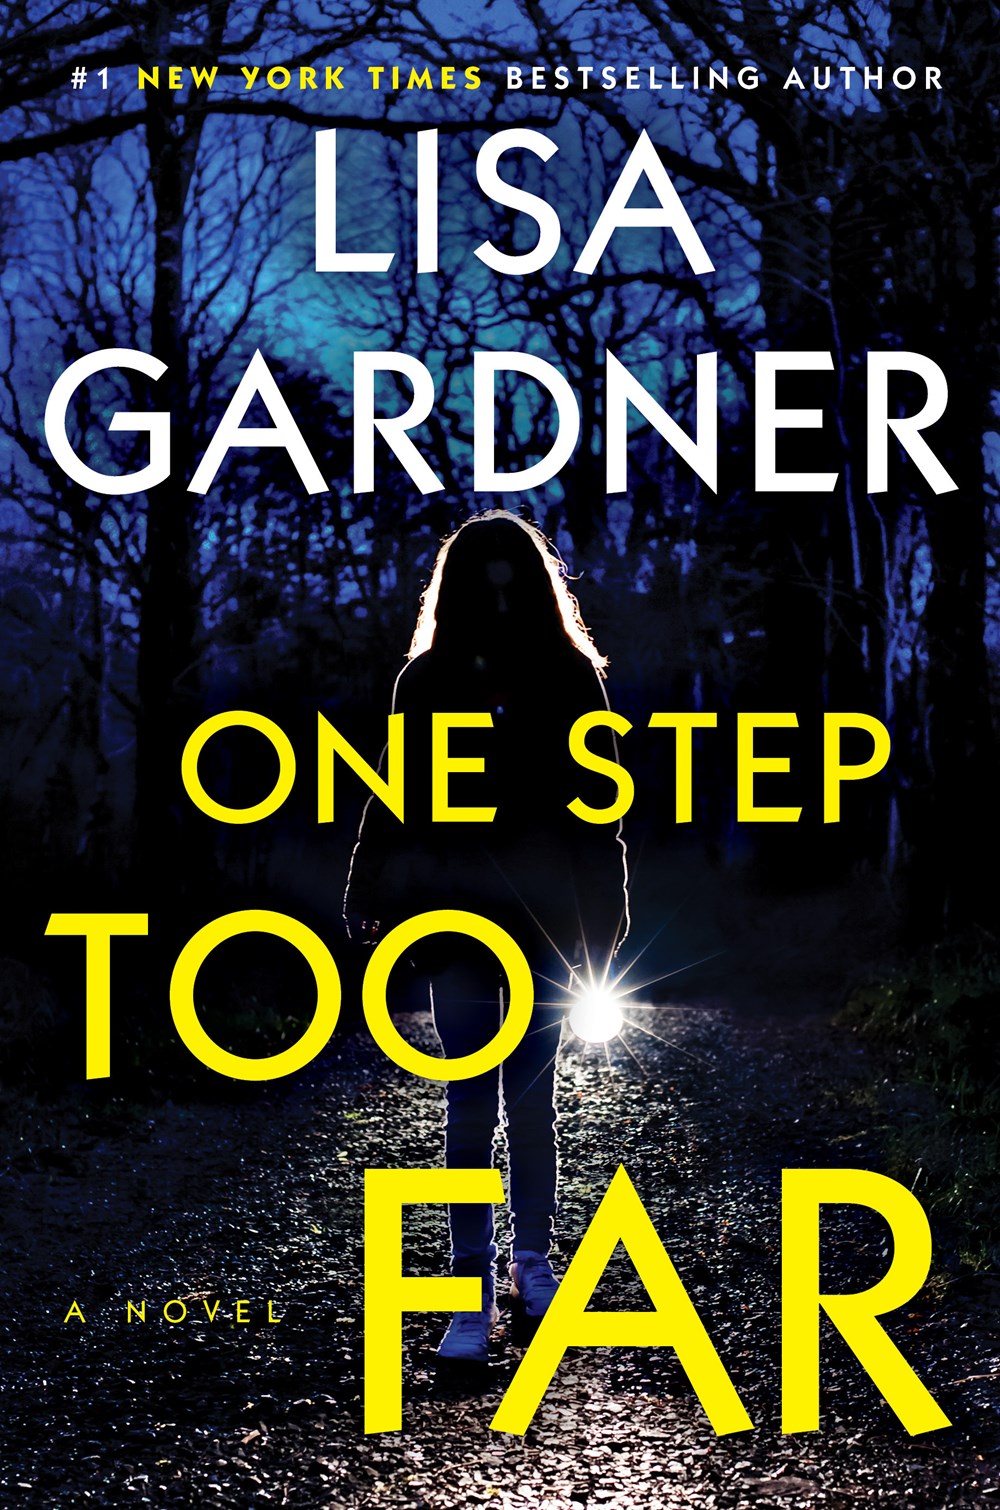 Read-Alikes for ‘One Step Too Far’ by Lisa Gardner | LibraryReads